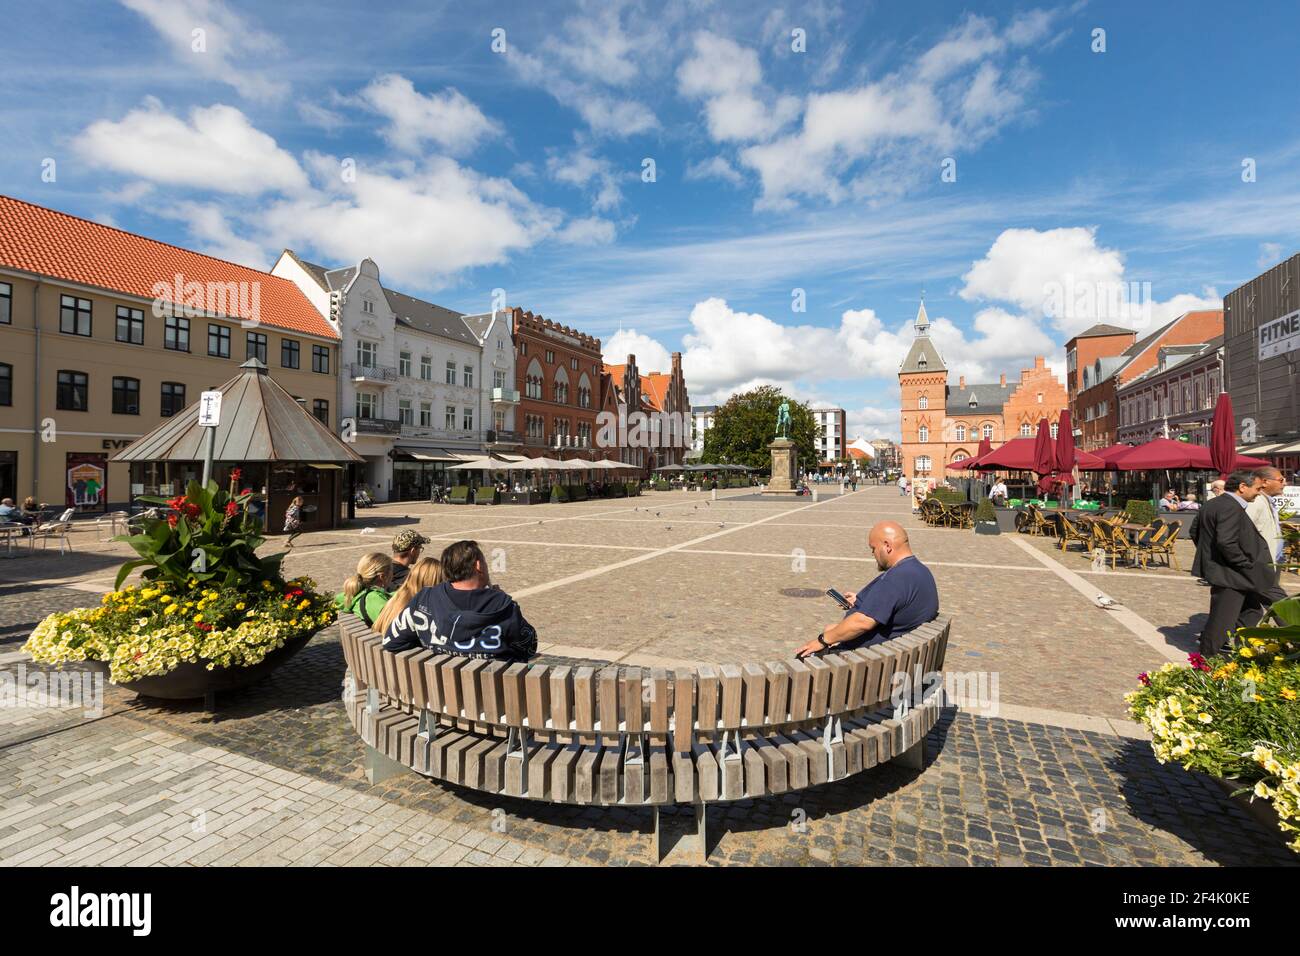 Esbjerg, Denmark - August 27, 2020: Torvet, the main town square with the statue of King Christian IX in the center. Stock Photo